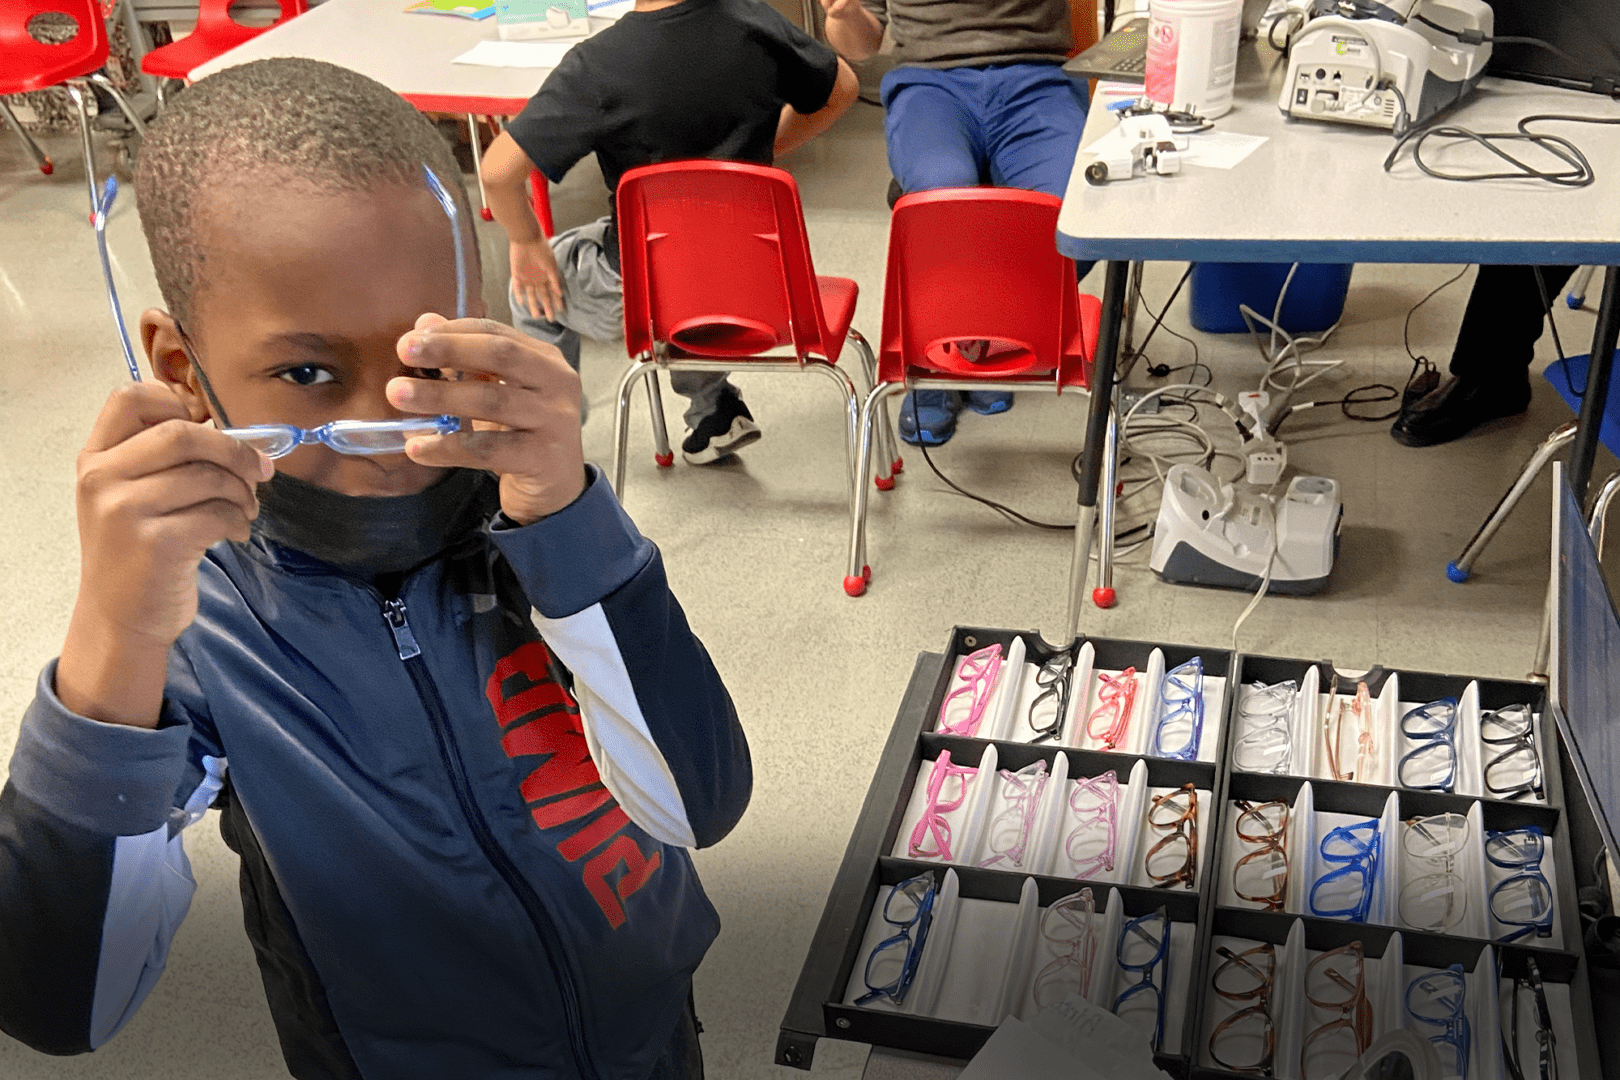 Prince, a young Black boy is in the middle of trying on a pair of blue rimmed glasses. He has his arms up and glasses more to the side as he's about to put them on. He's standing in front of a box with glasses in a classroom. He is wearing a black mask that is below his chin and a navy blue Puma zip-up hoodie.